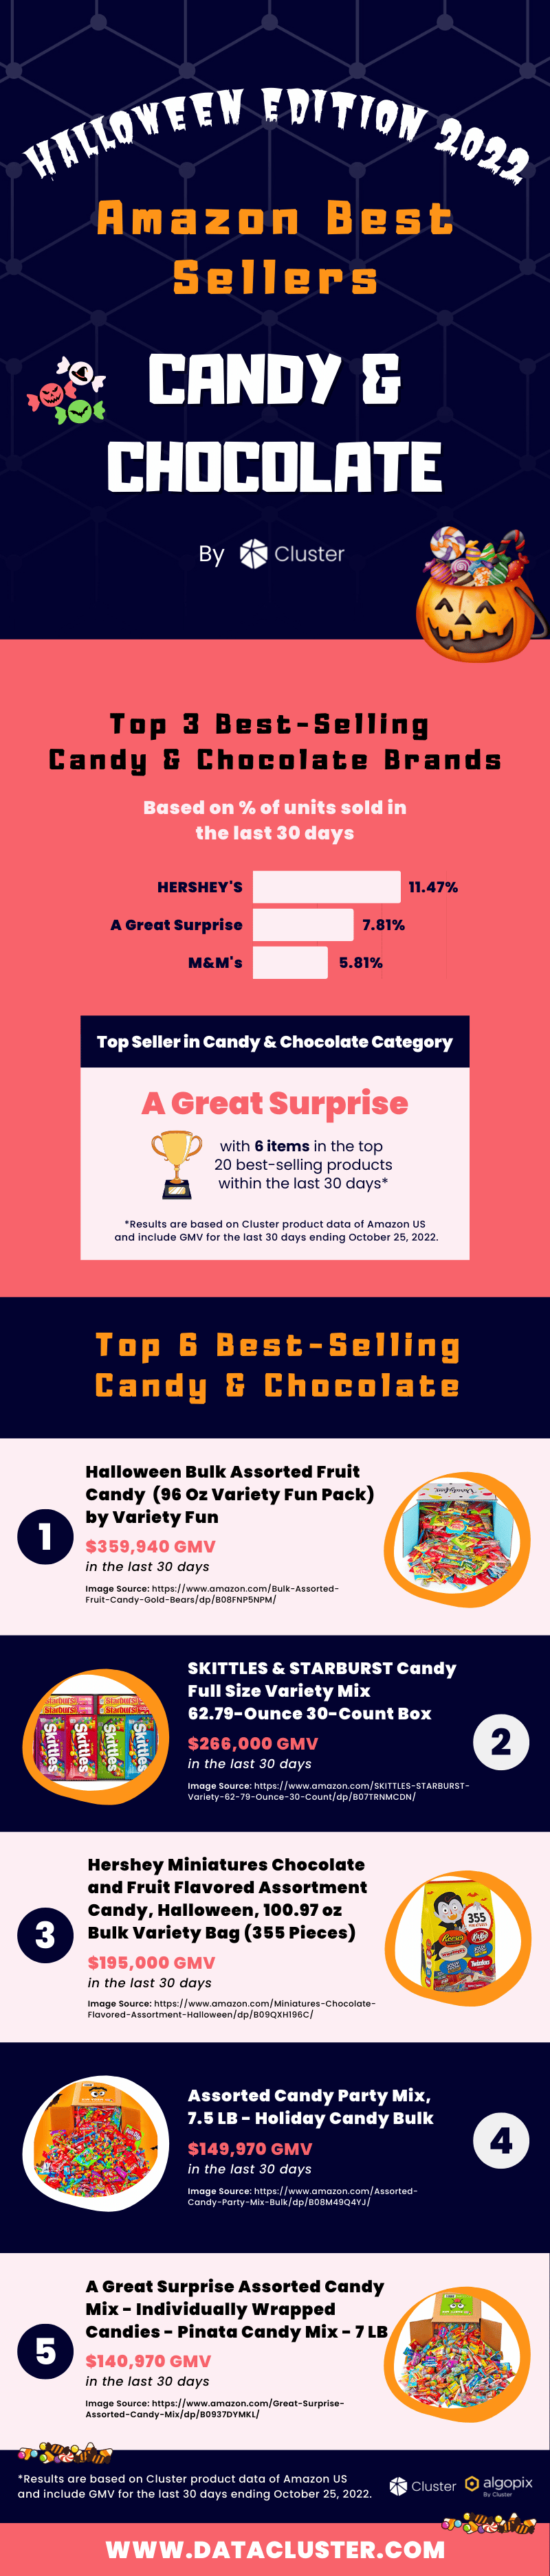 Amazon Best Sellers in Candy & Chocolate Category by Cluster - datacluster.com